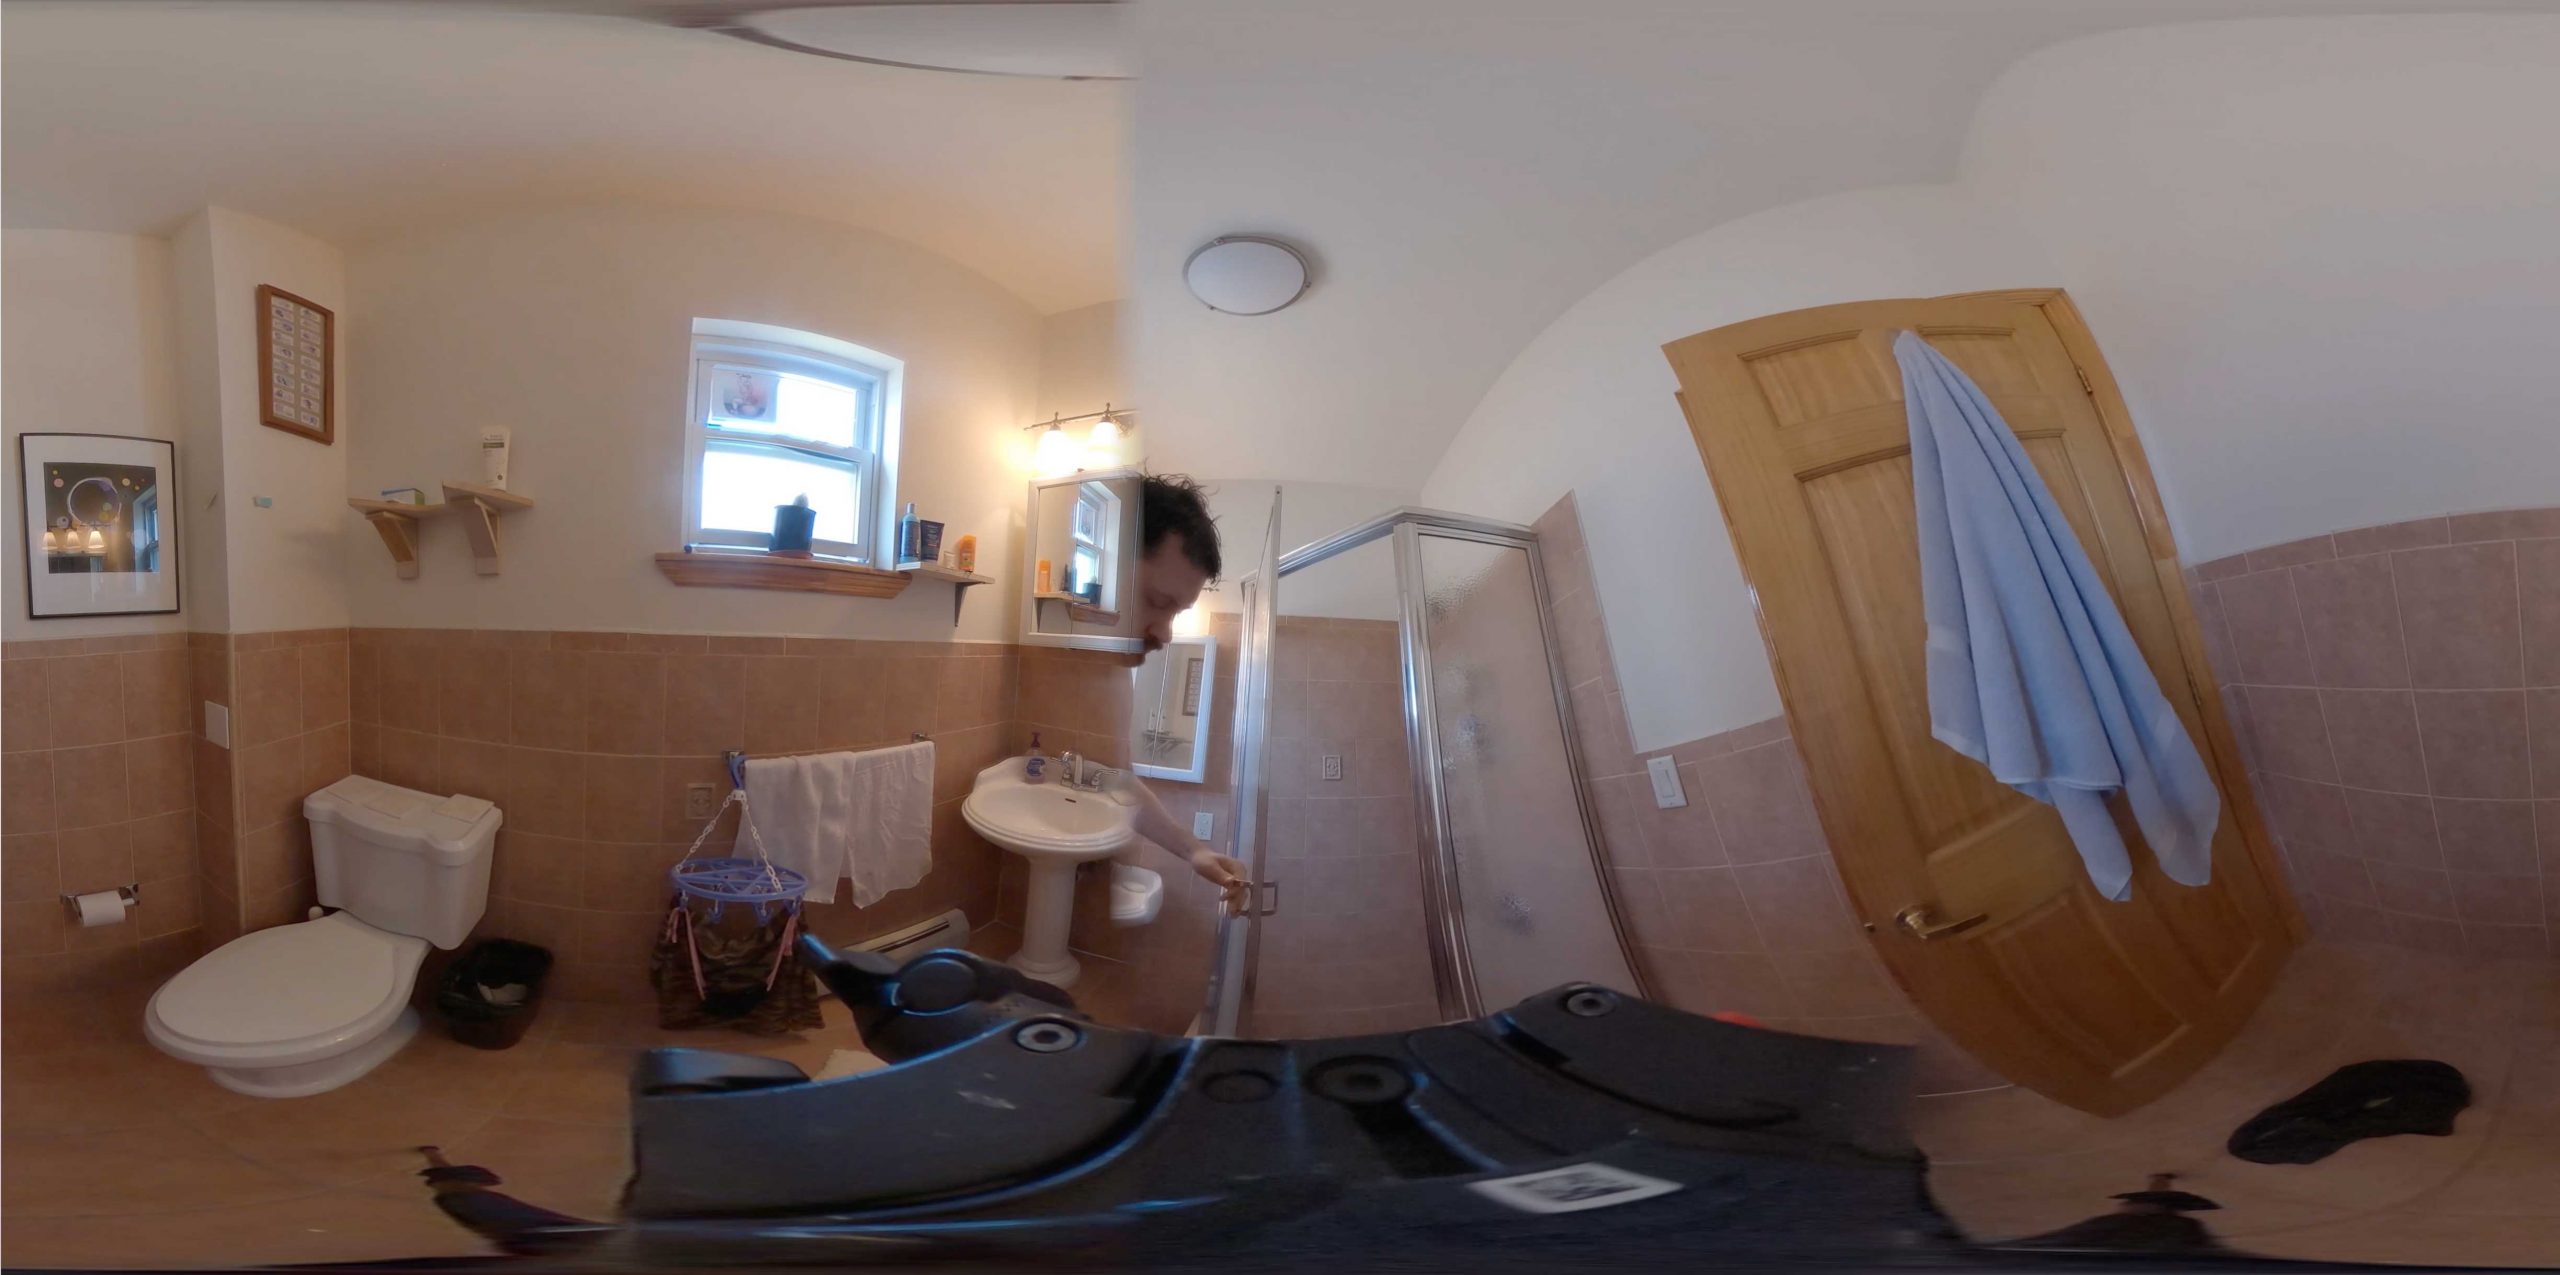 a still image from a 360 degree video of the artist in his bathroom